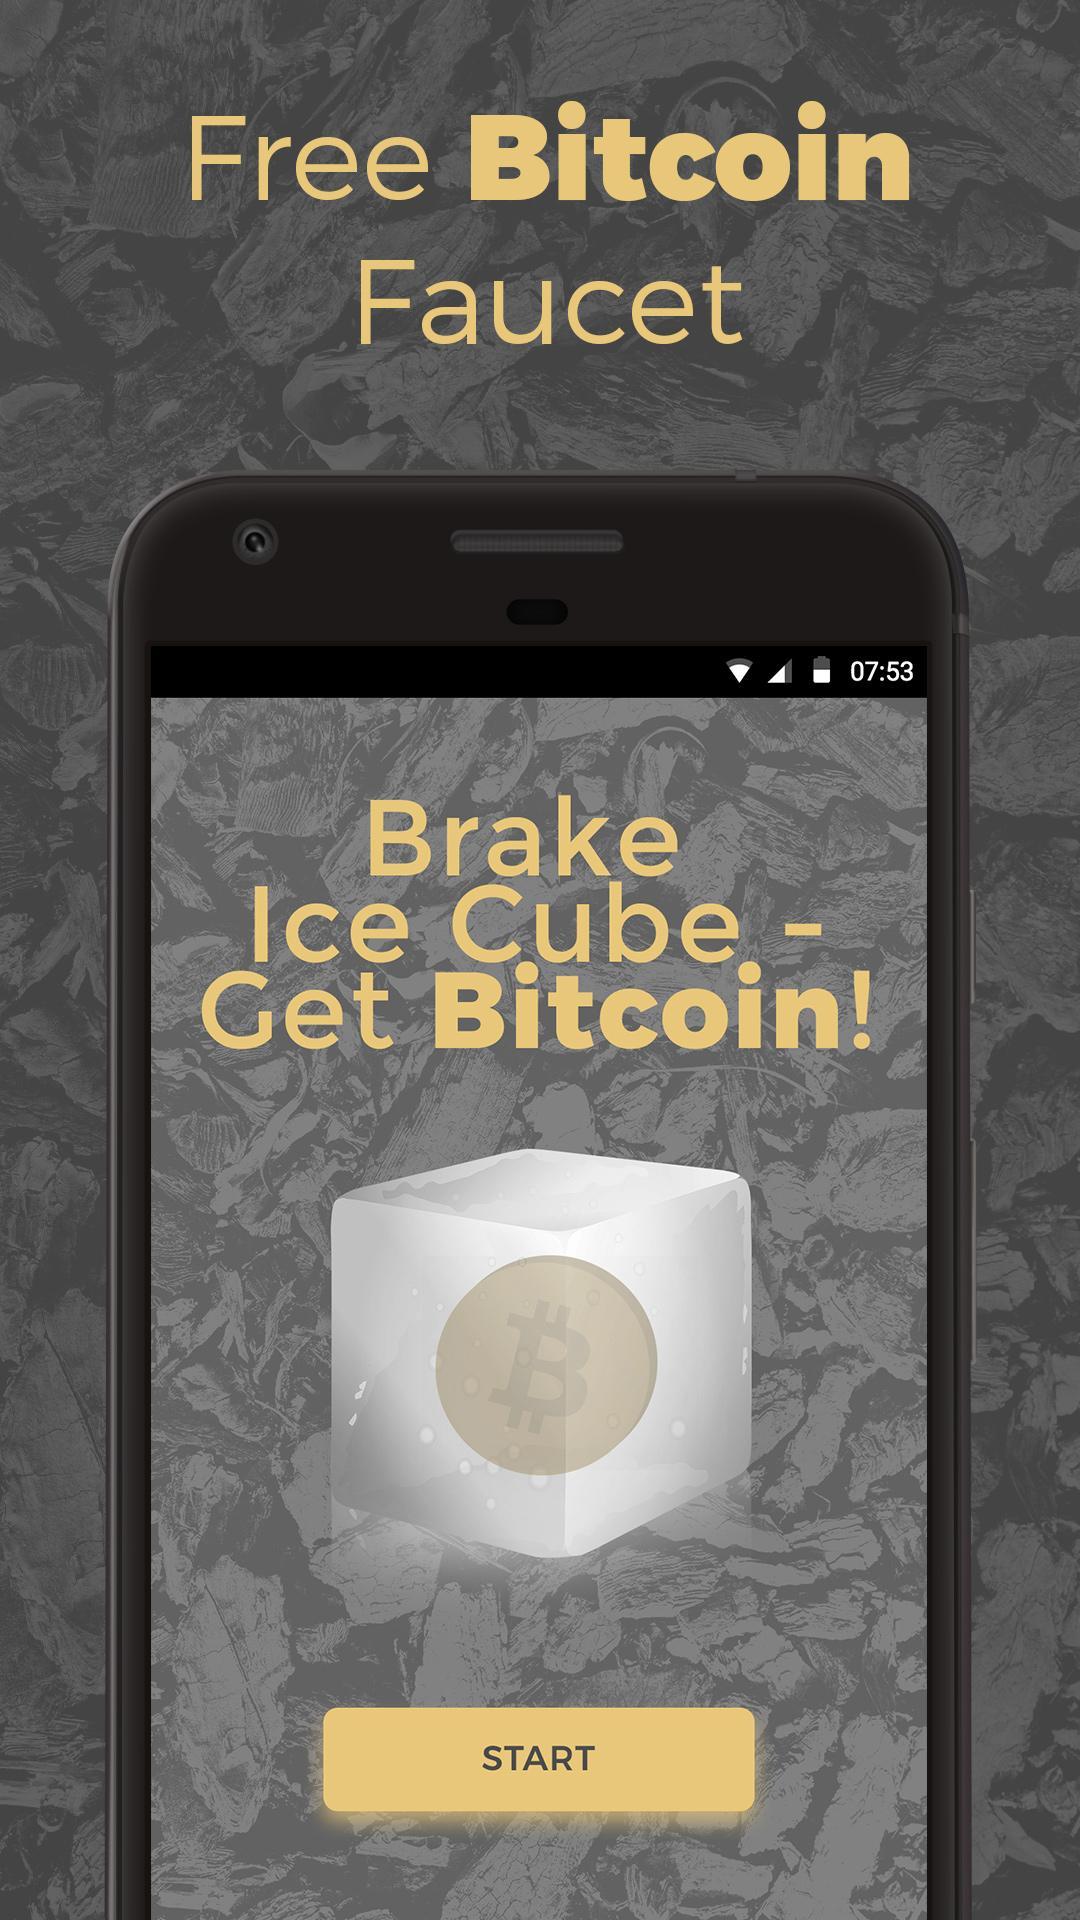 Free Bitcoin Faucet - Bitcoin Maker for Android - APK Download